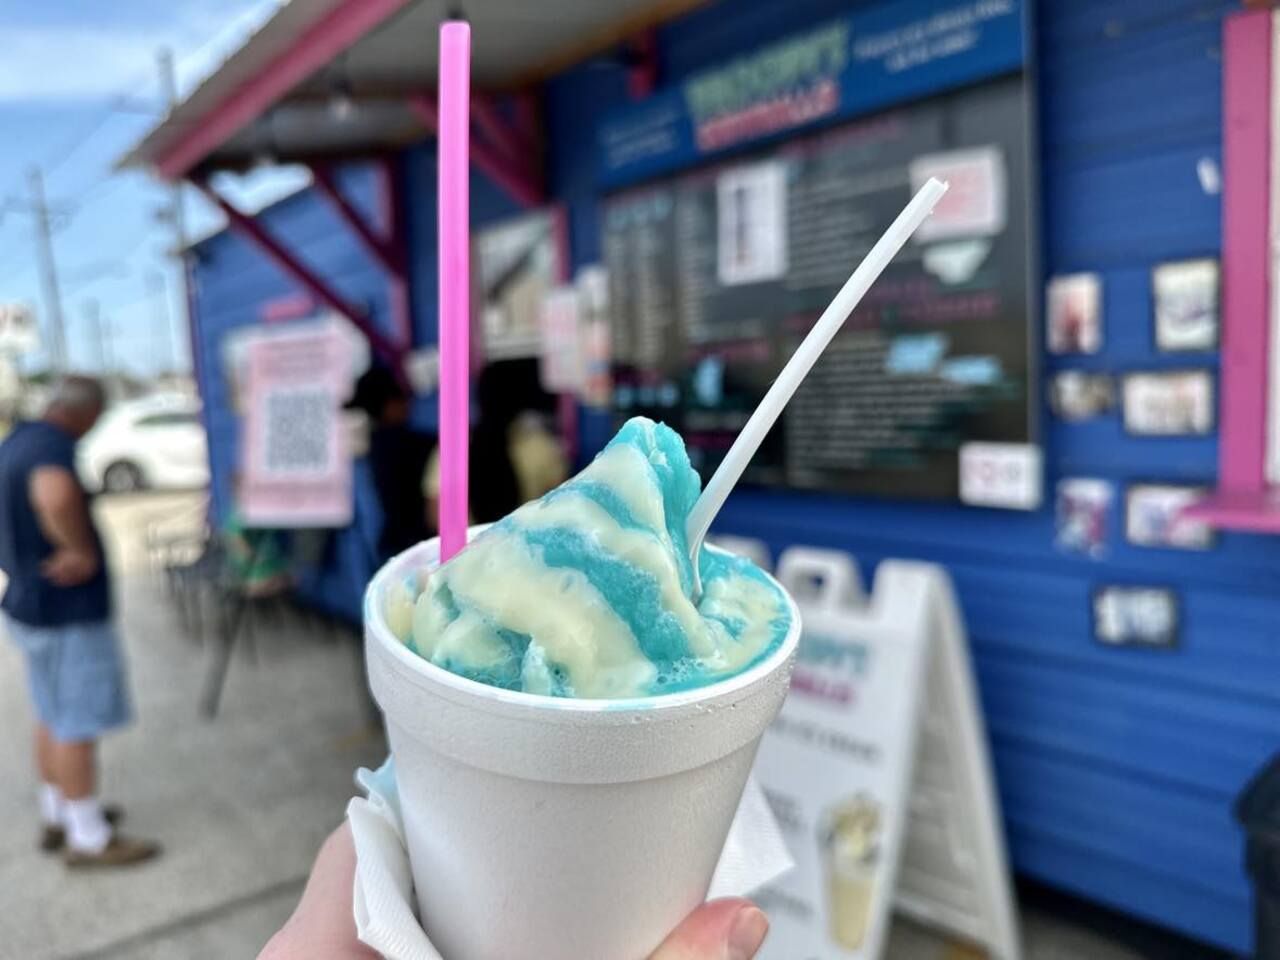 Photo shows a blue snoball from Droopy's